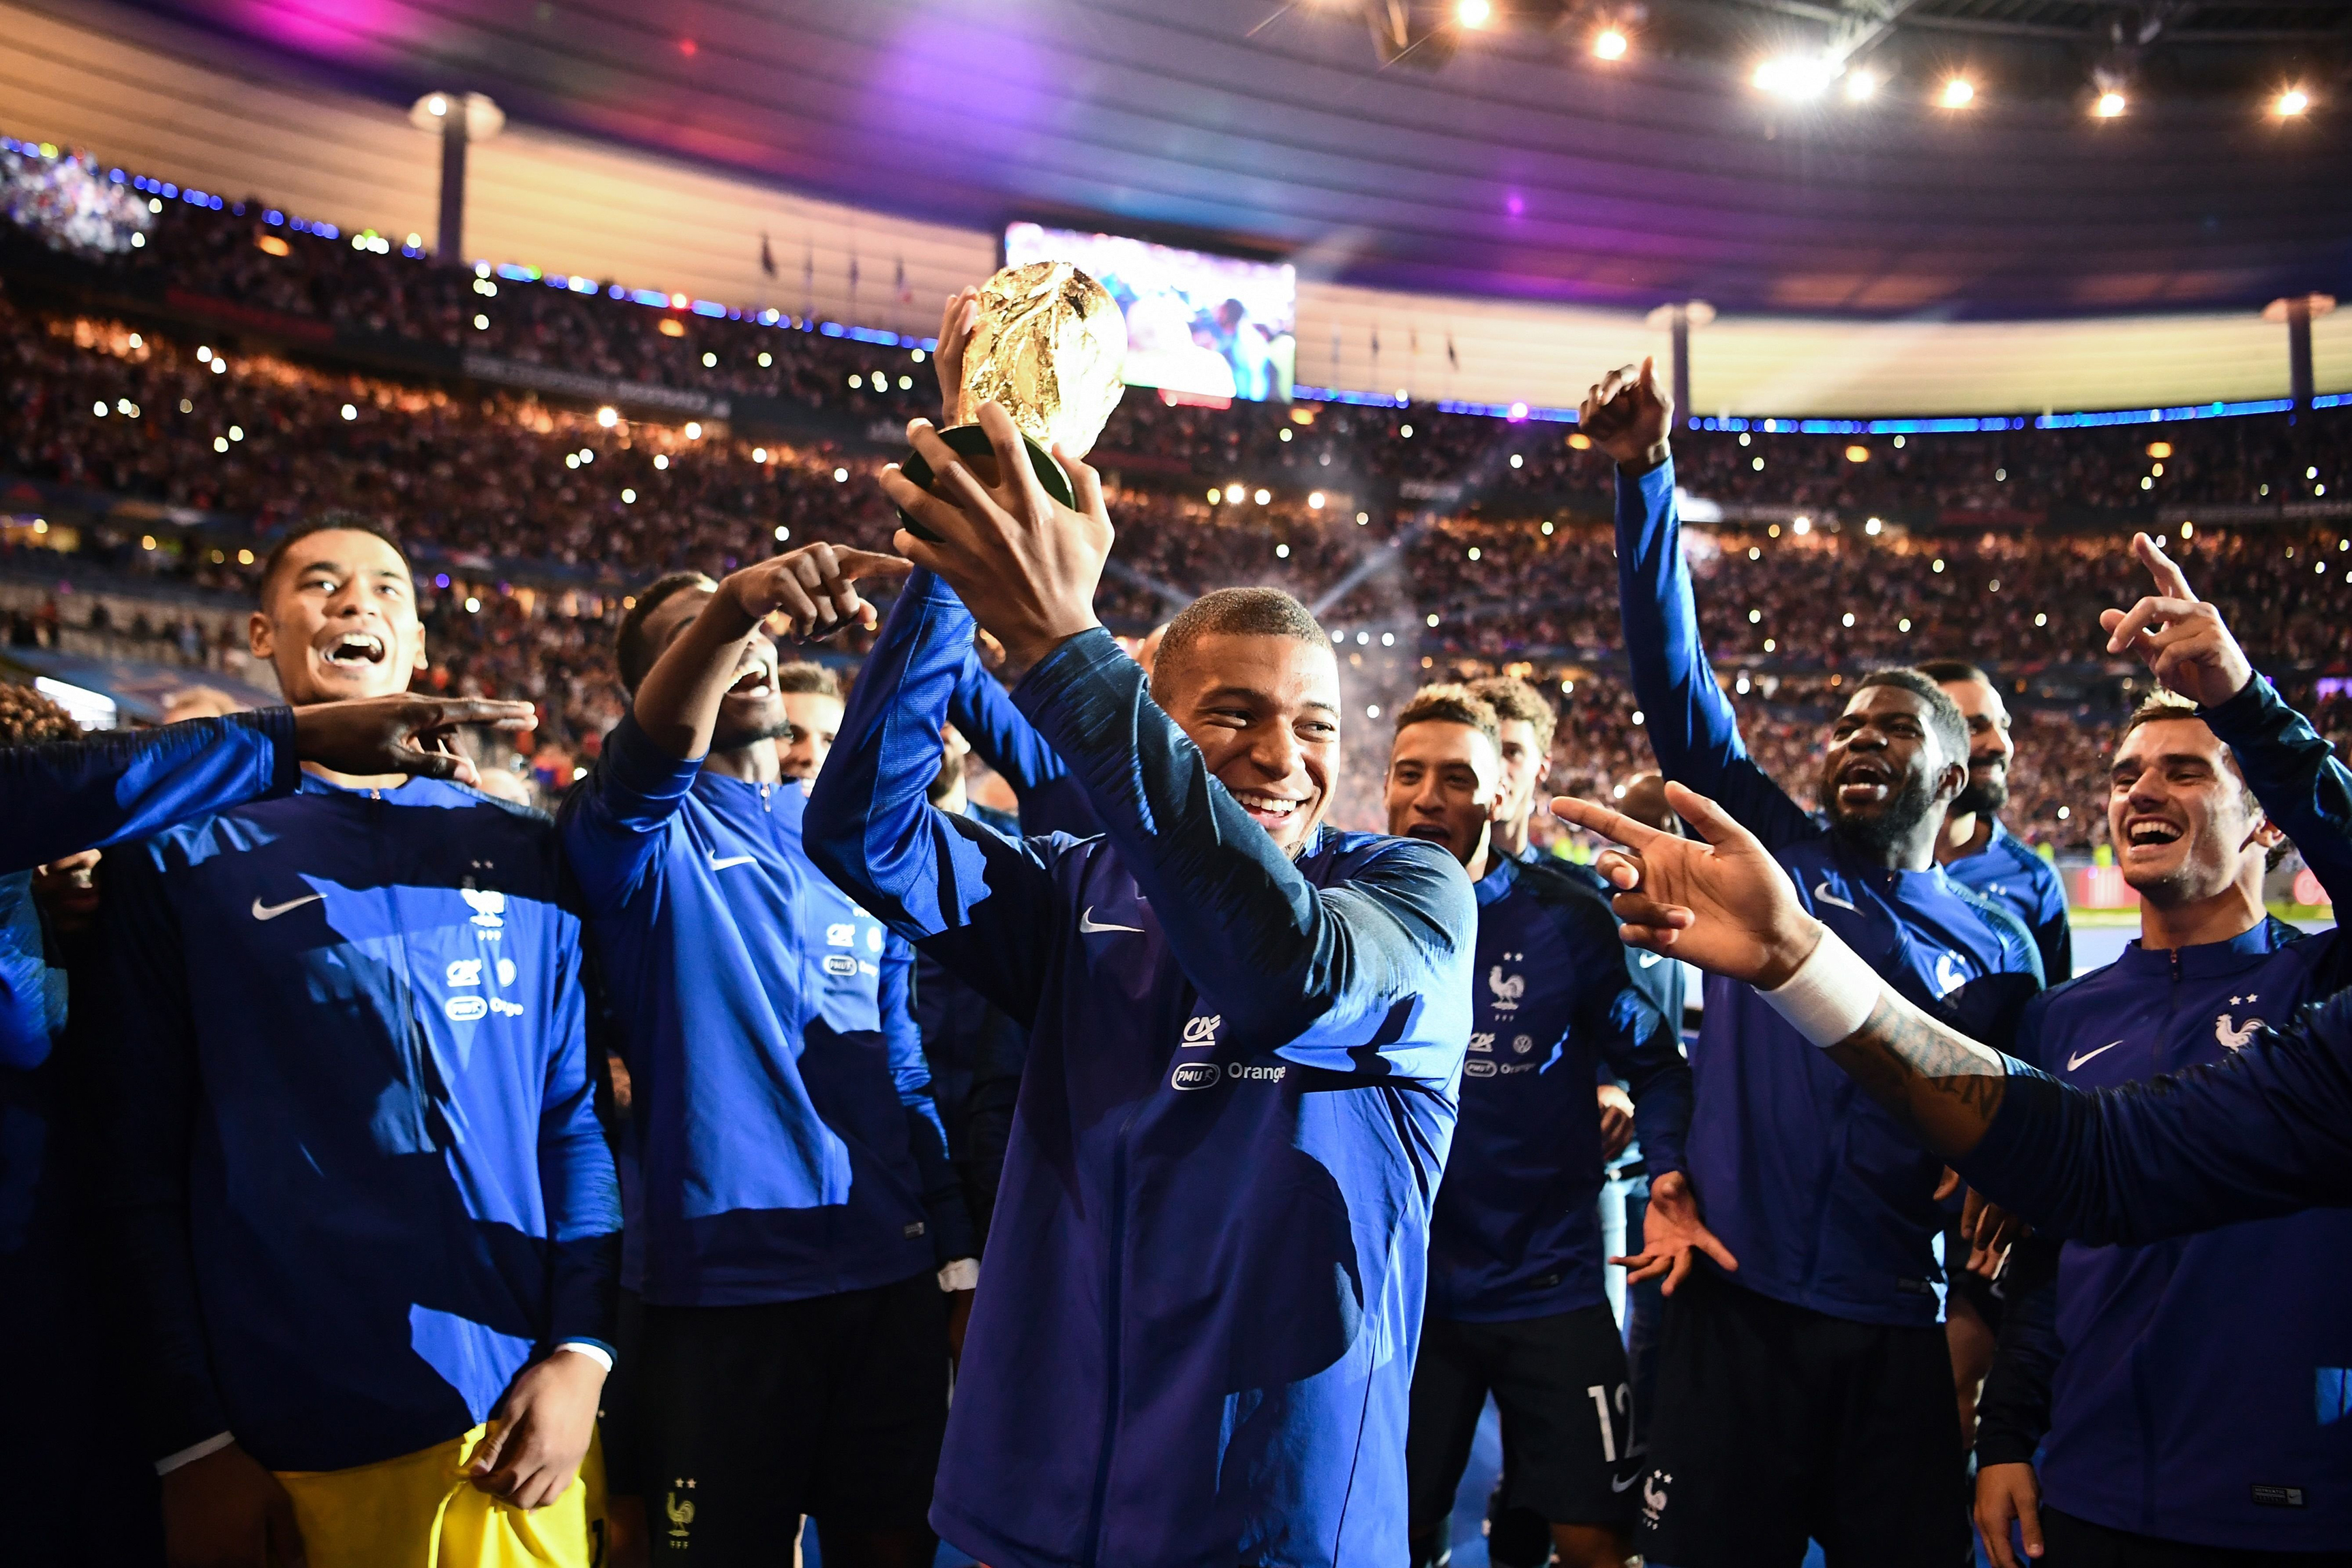 Mbappé during a September ceremony to celebrate France’s World Cup win. At 19, he became the country’s youngest goal scorer at a major tournament. (Sipa/AP Images)